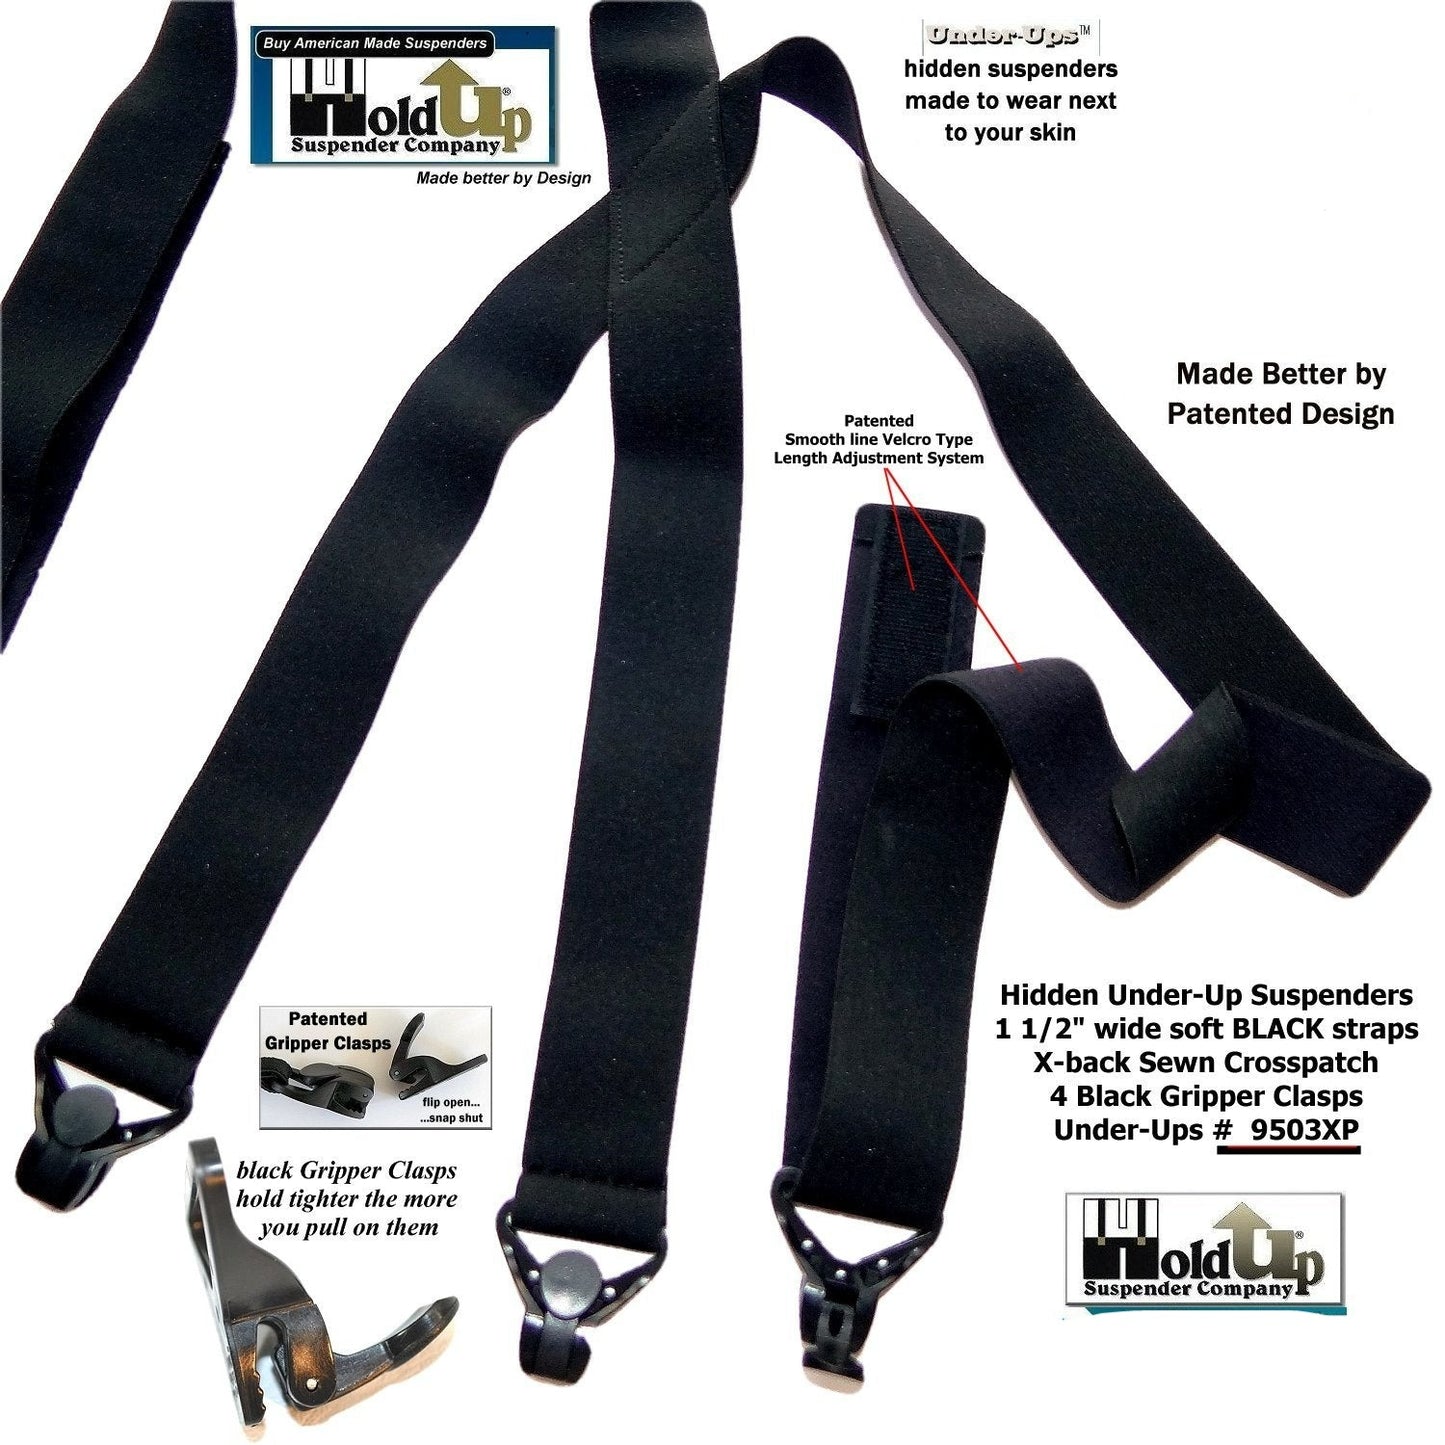 Hold-Ups 1 1/2" All Black Hidden Undergarment Suspenders with USA Patented Black Gripper Clasps